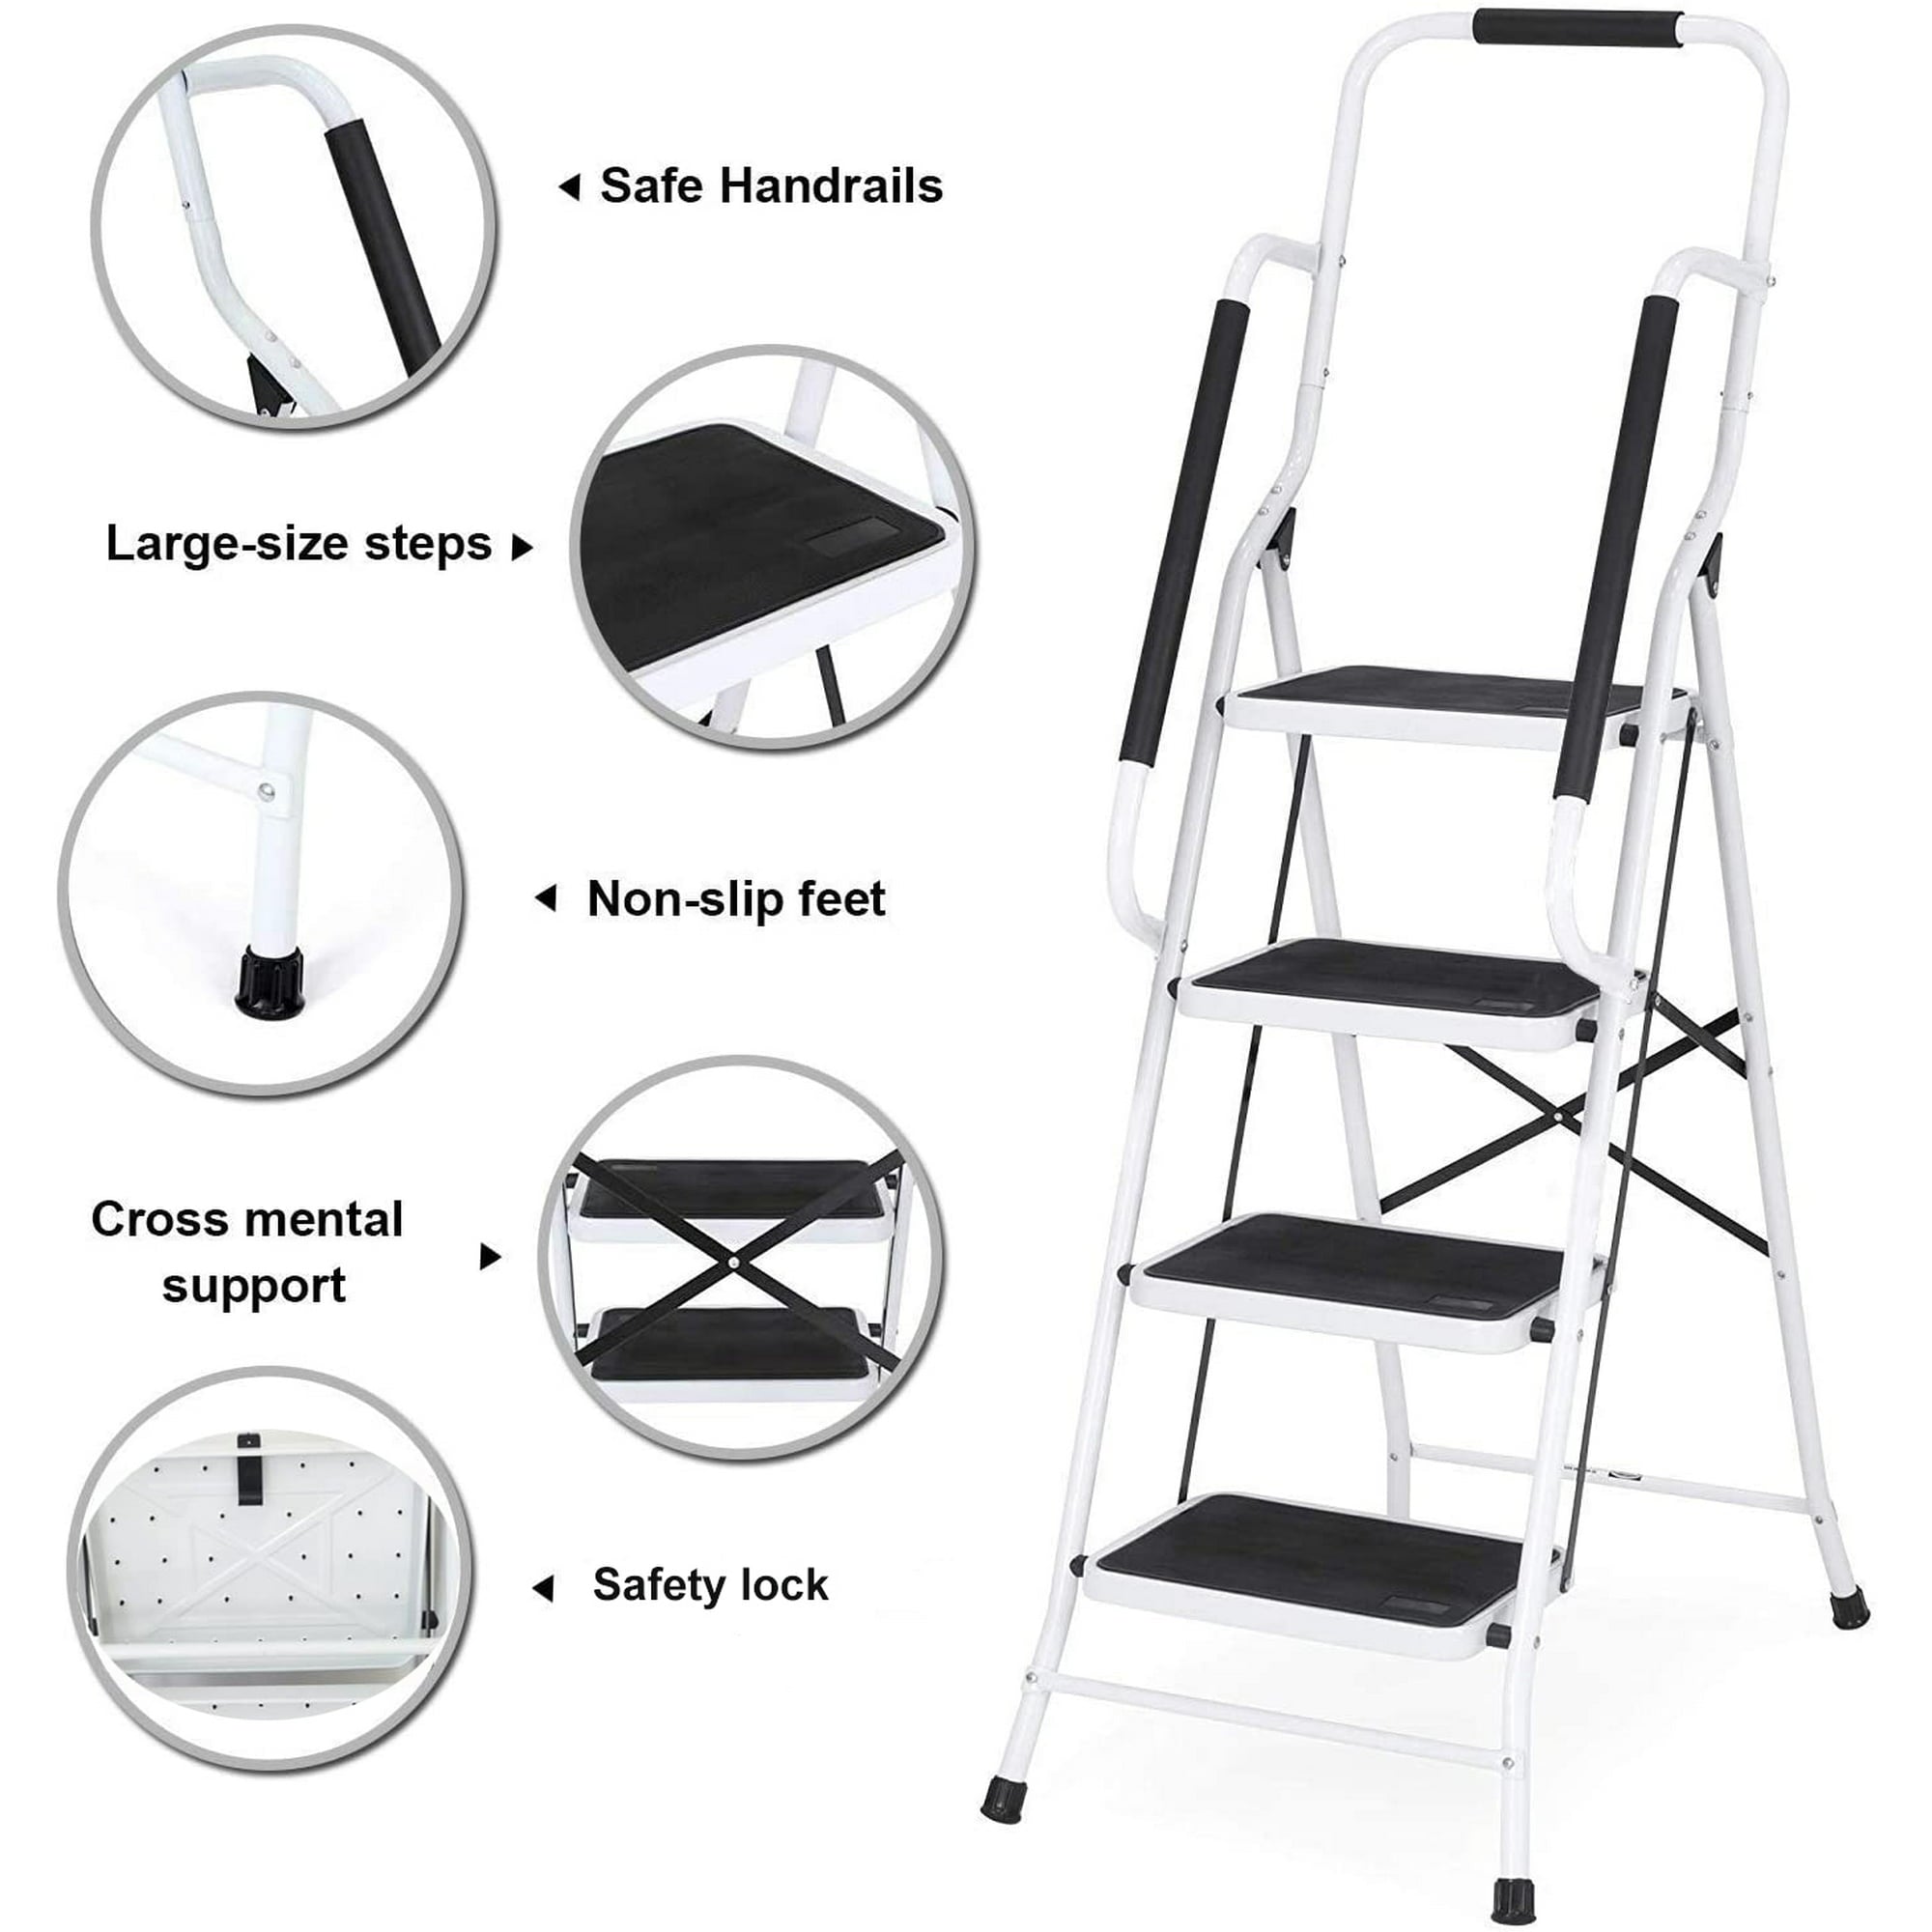 SUGIFT 4 Step Ladder Portable Folding Step Stool for Household and Office